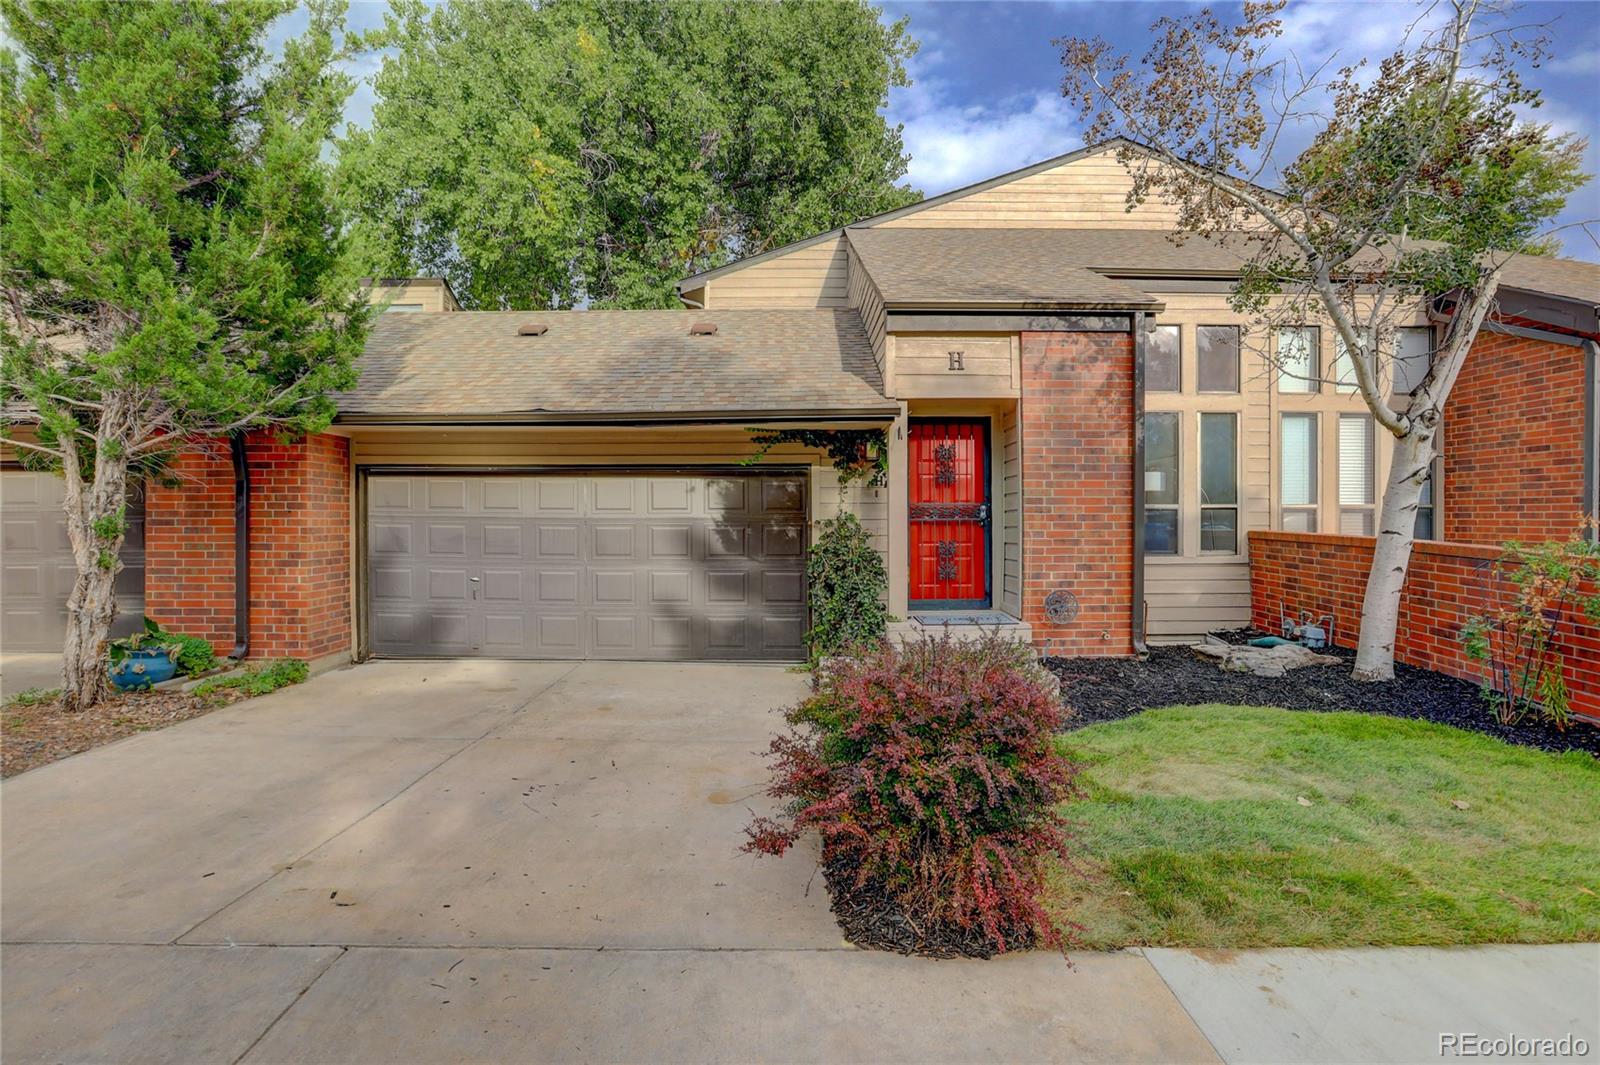 540 s forest street, denver sold home. Closed on 2023-03-28 for $910,000.